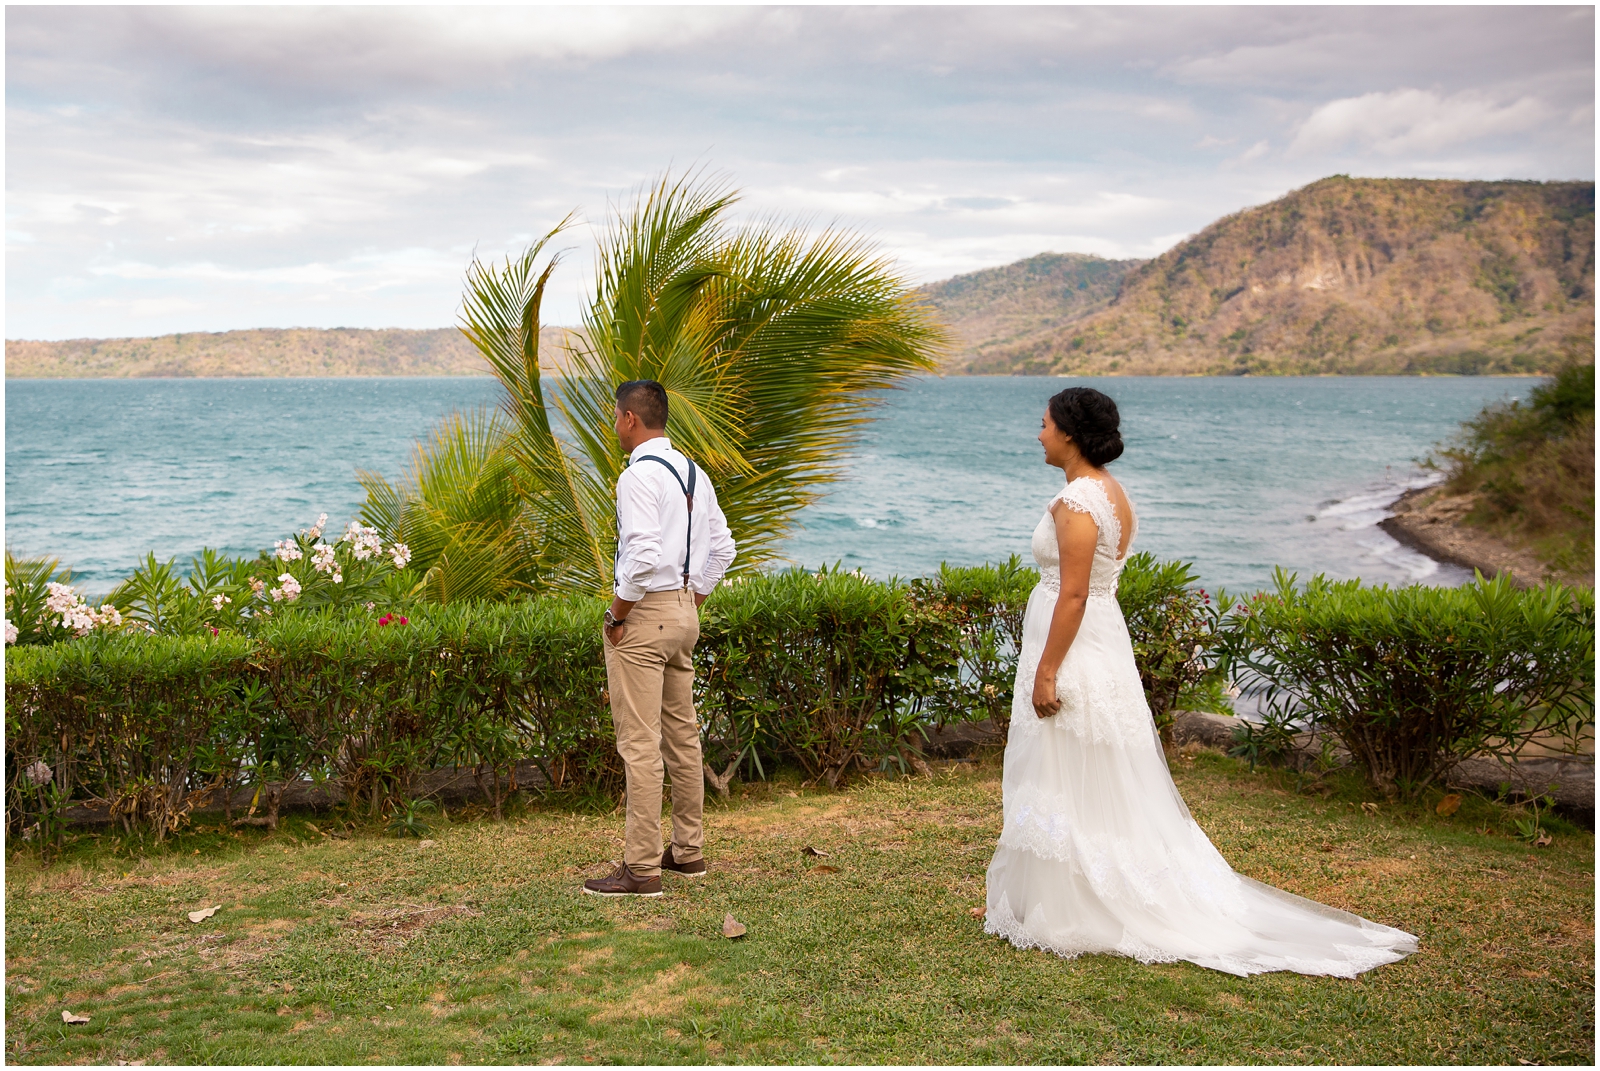 A couple's first look overlooking a Nicaraguan lake.